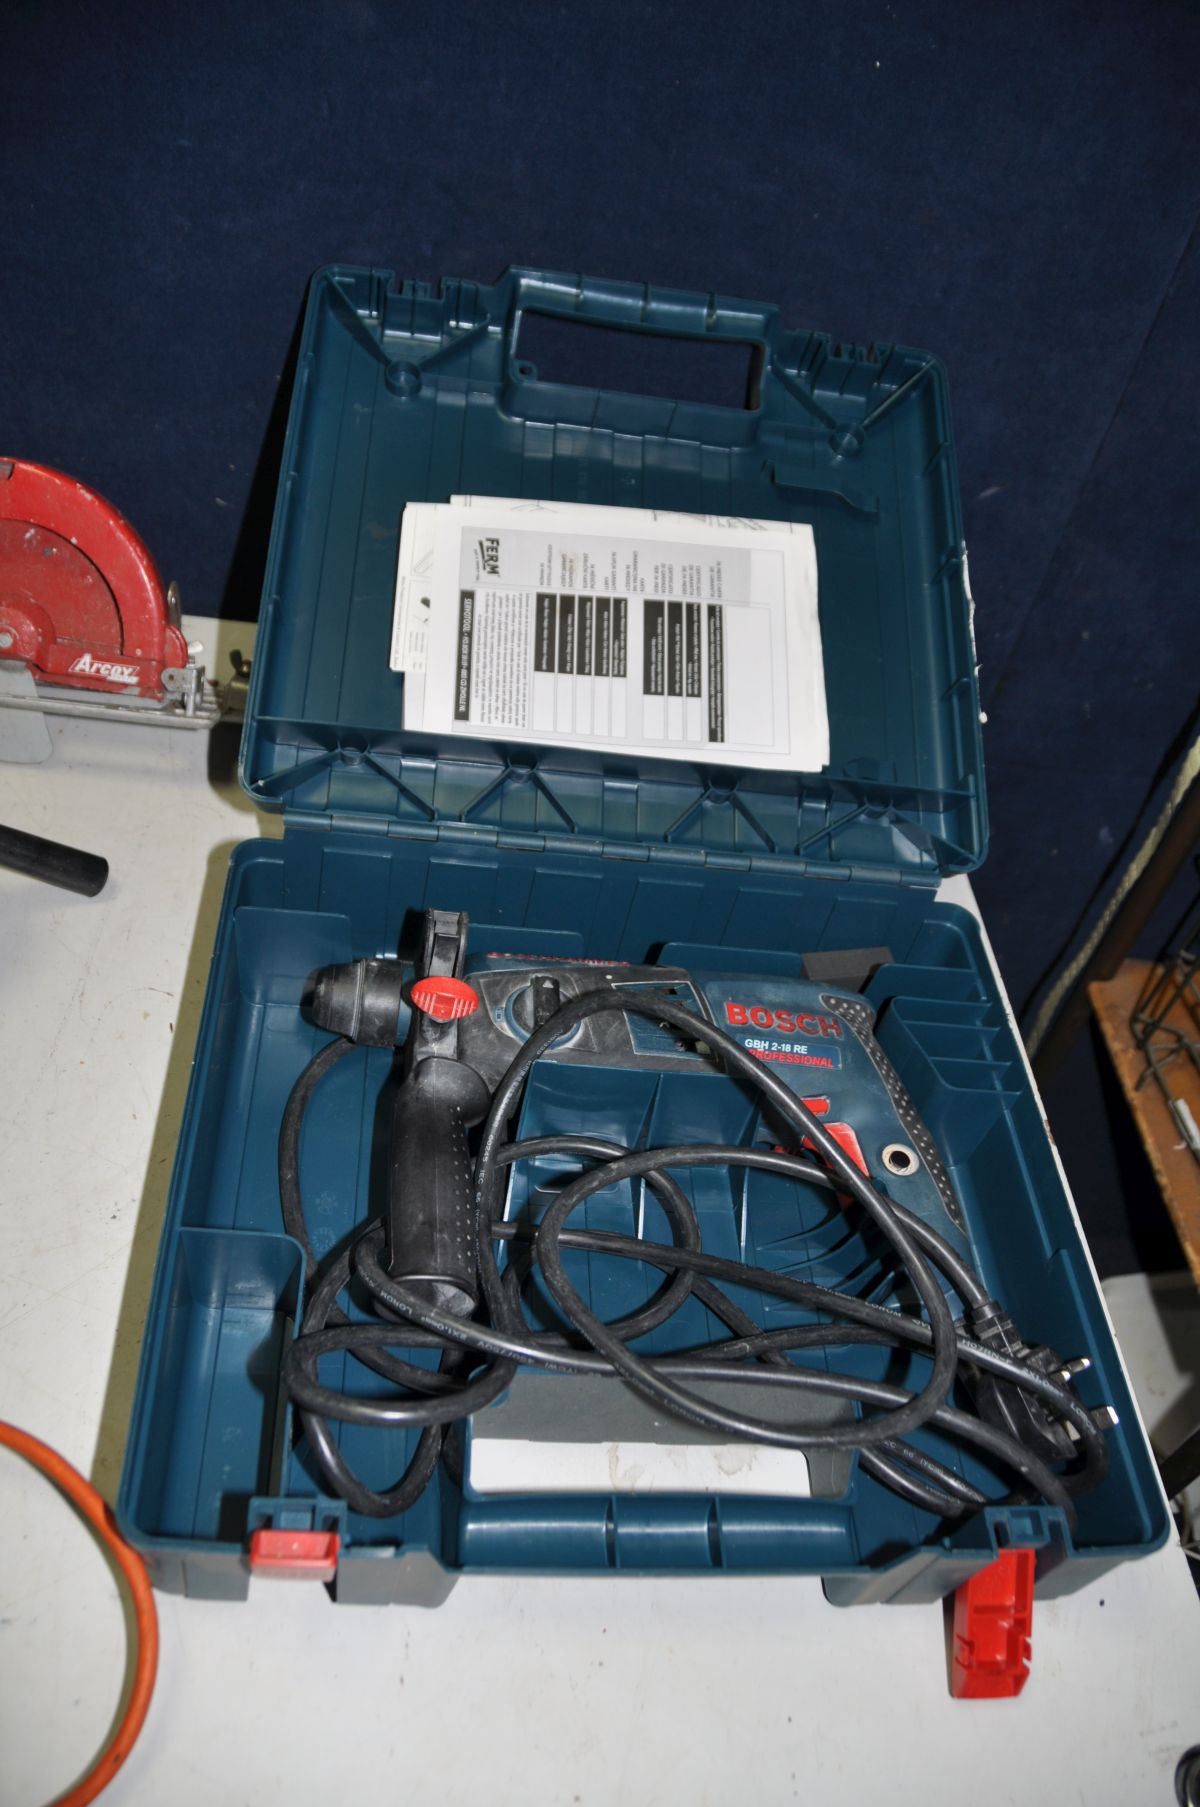 A CASED BOSCH GBH 1-18 RE PROFESSIONAL SDS DRILL (not working), four vintage Black and Decker drills - Image 4 of 4